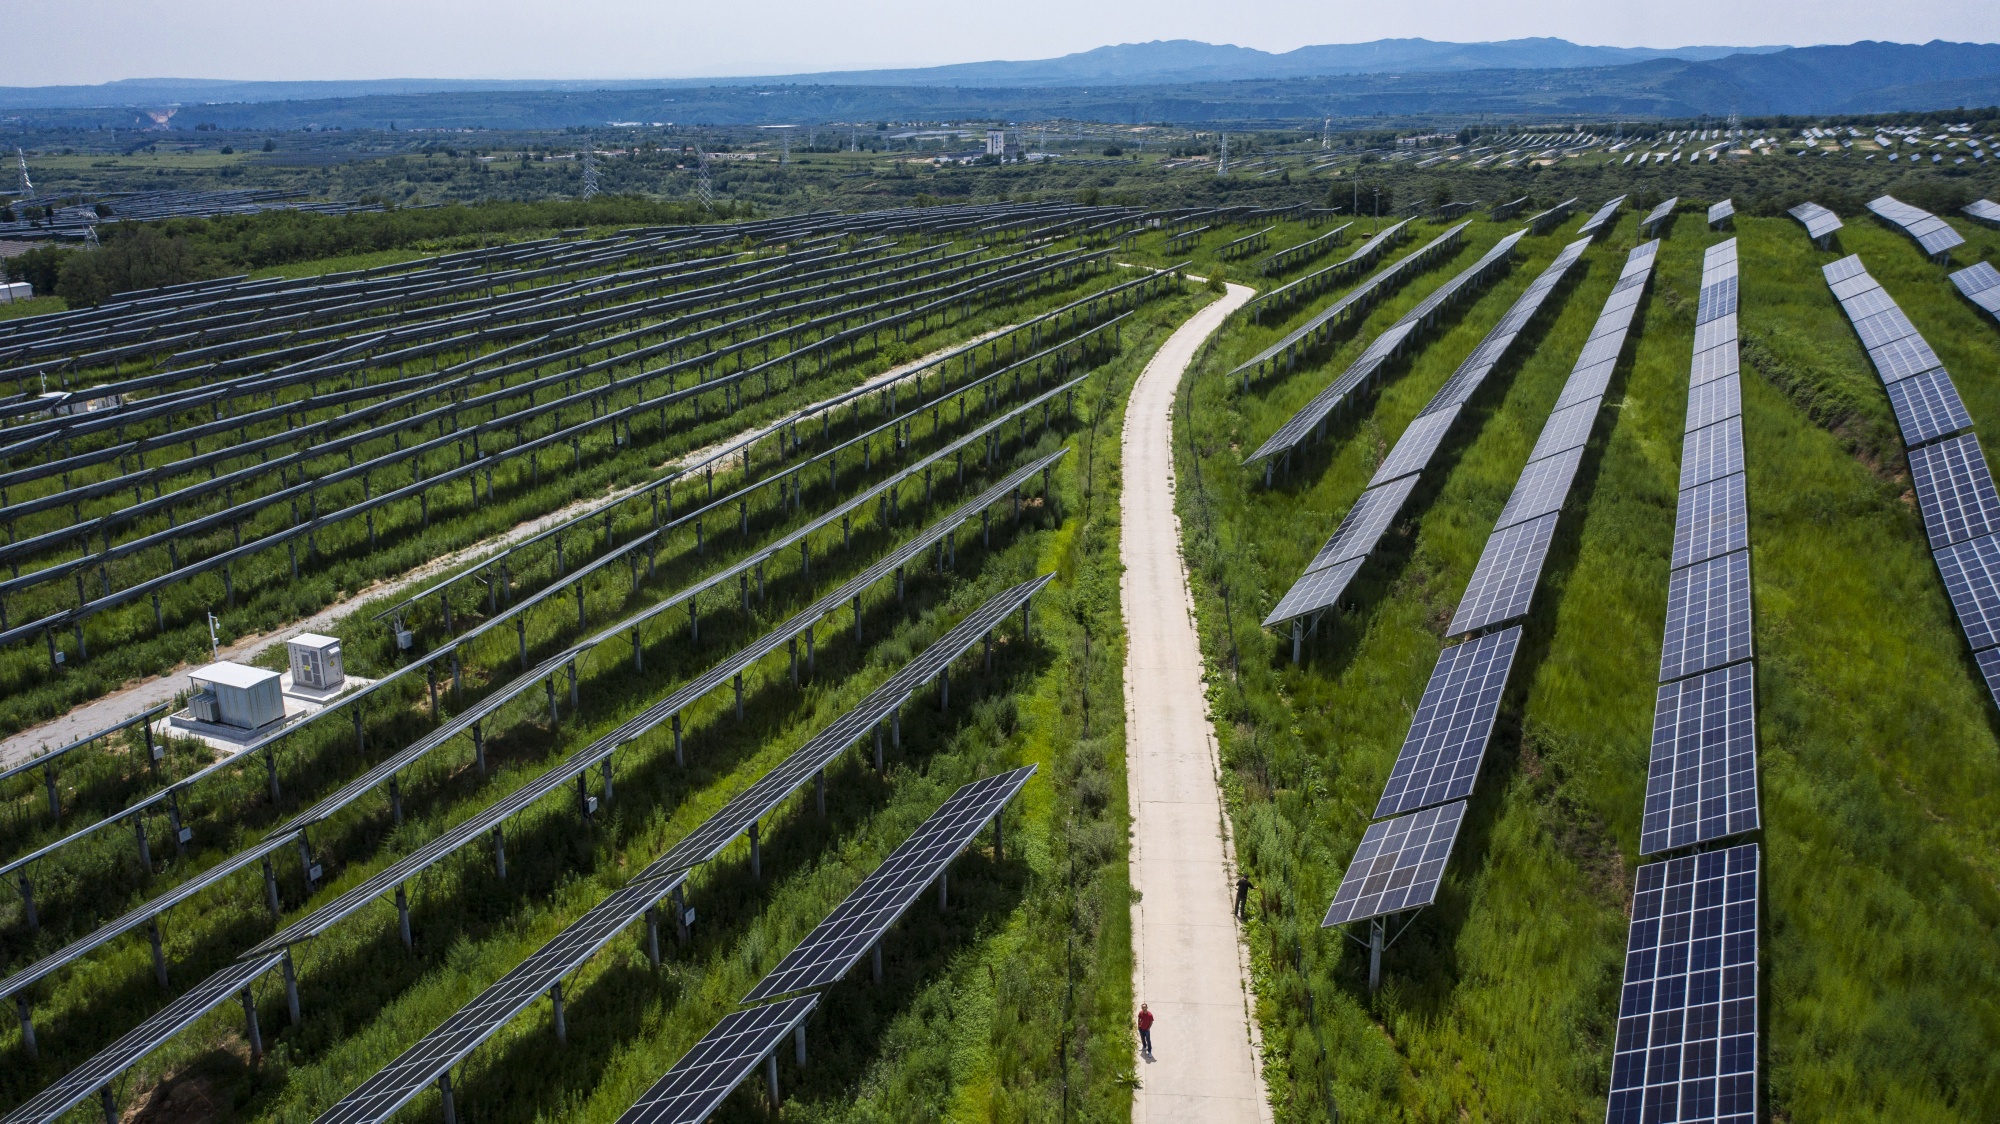 A solar power plant co-owned by Longi Green Energy Technology Co. and China Three Gorges Corp. in Tongchuan, Shaanxi Province, China operates on July 20, 2020.